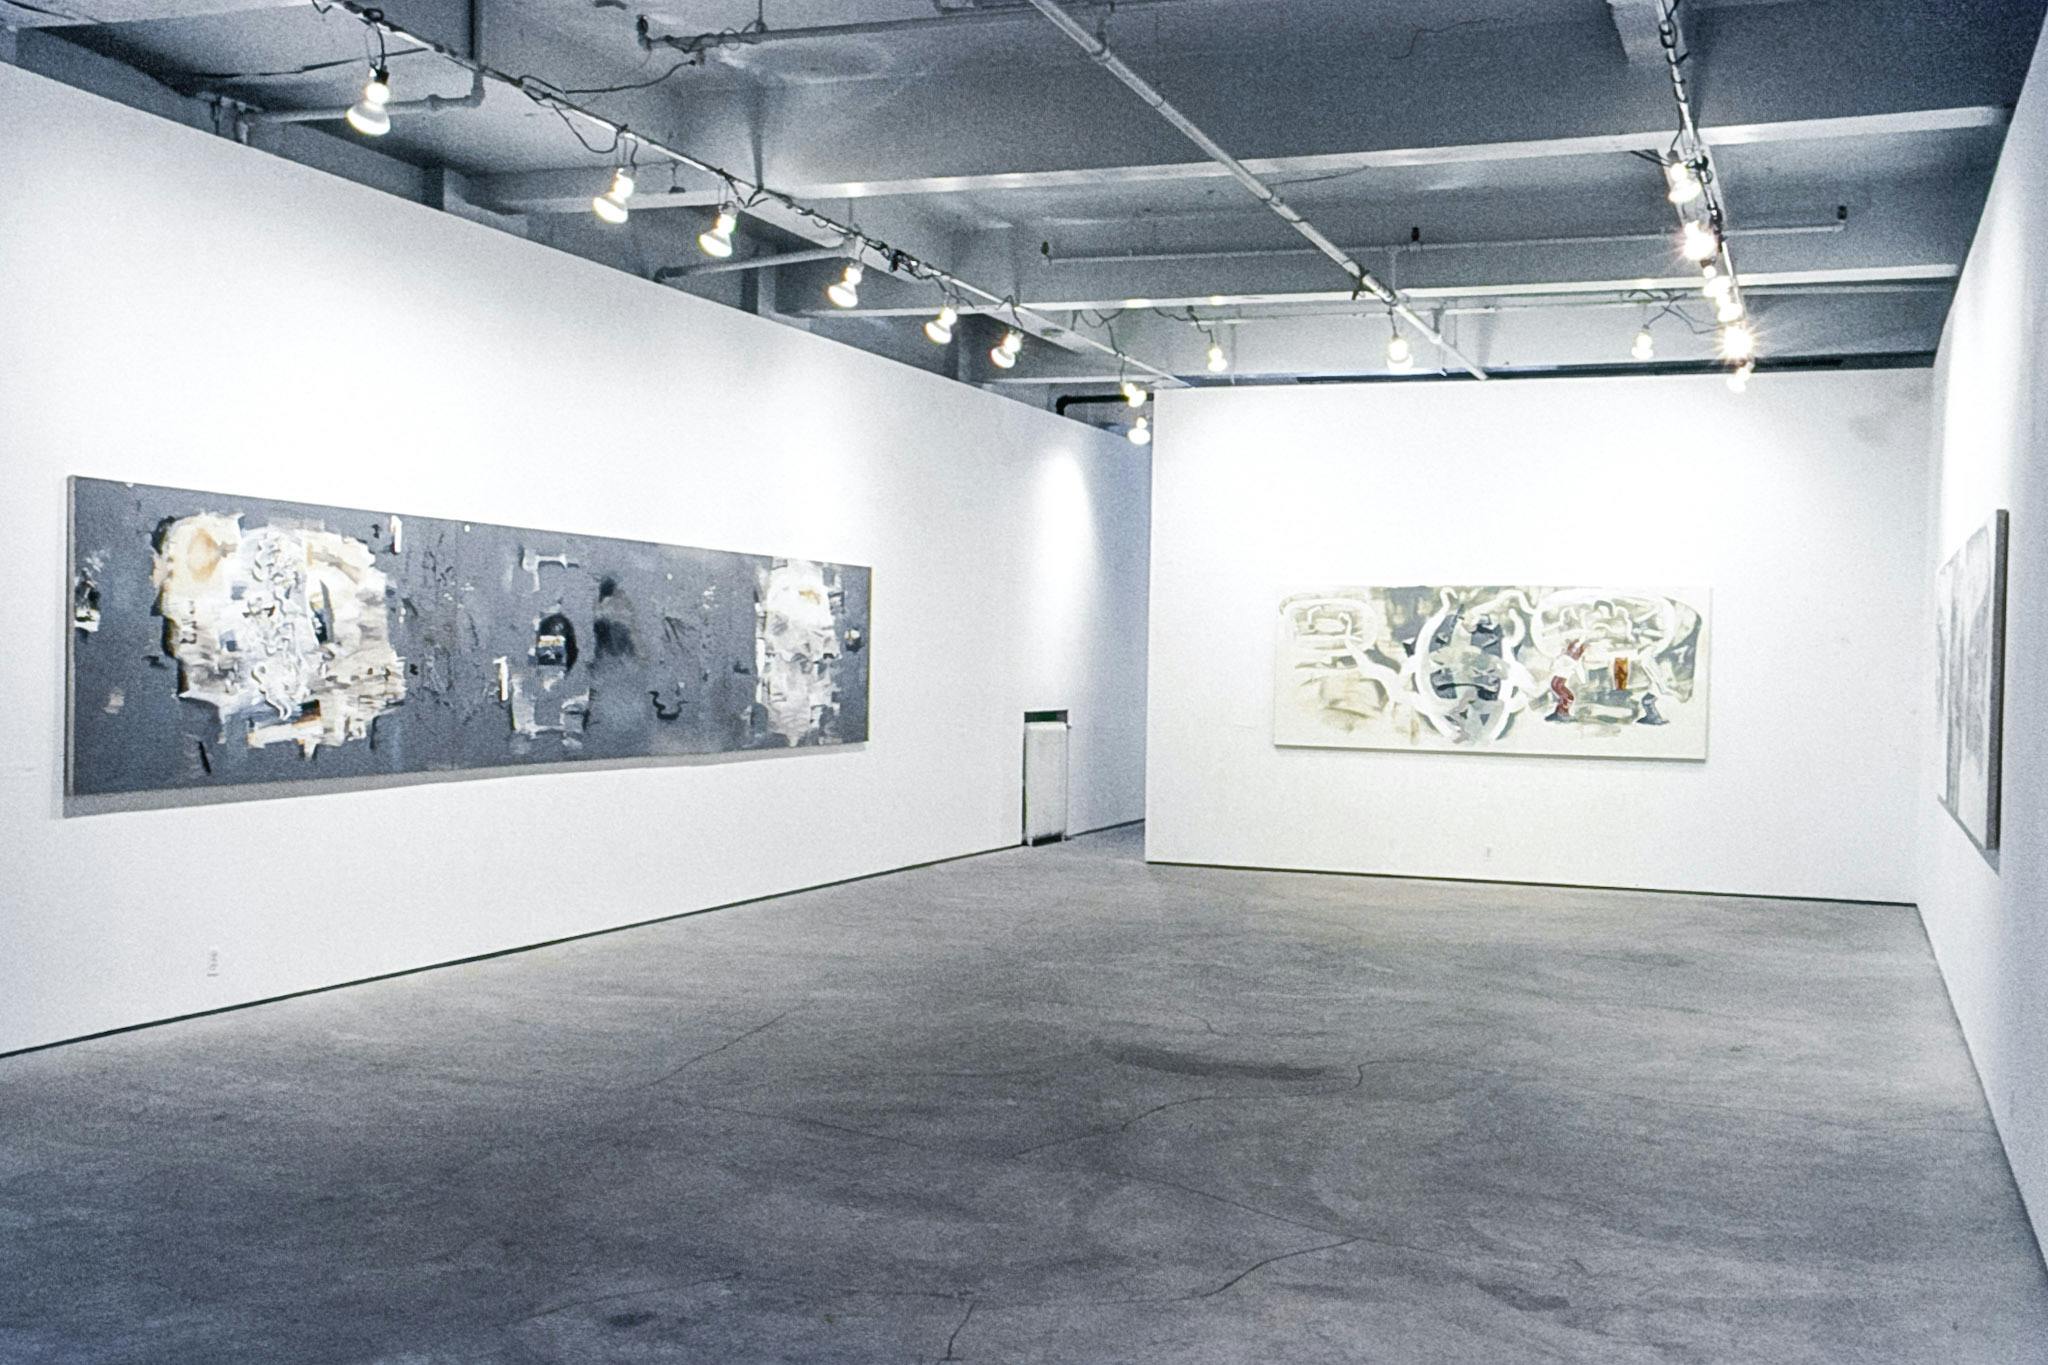 A gallery space with several large paintings mounted on the walls. The paintings are abstract and highly detailed, incorporating different shades of grey, red, yellow, and black and white. 